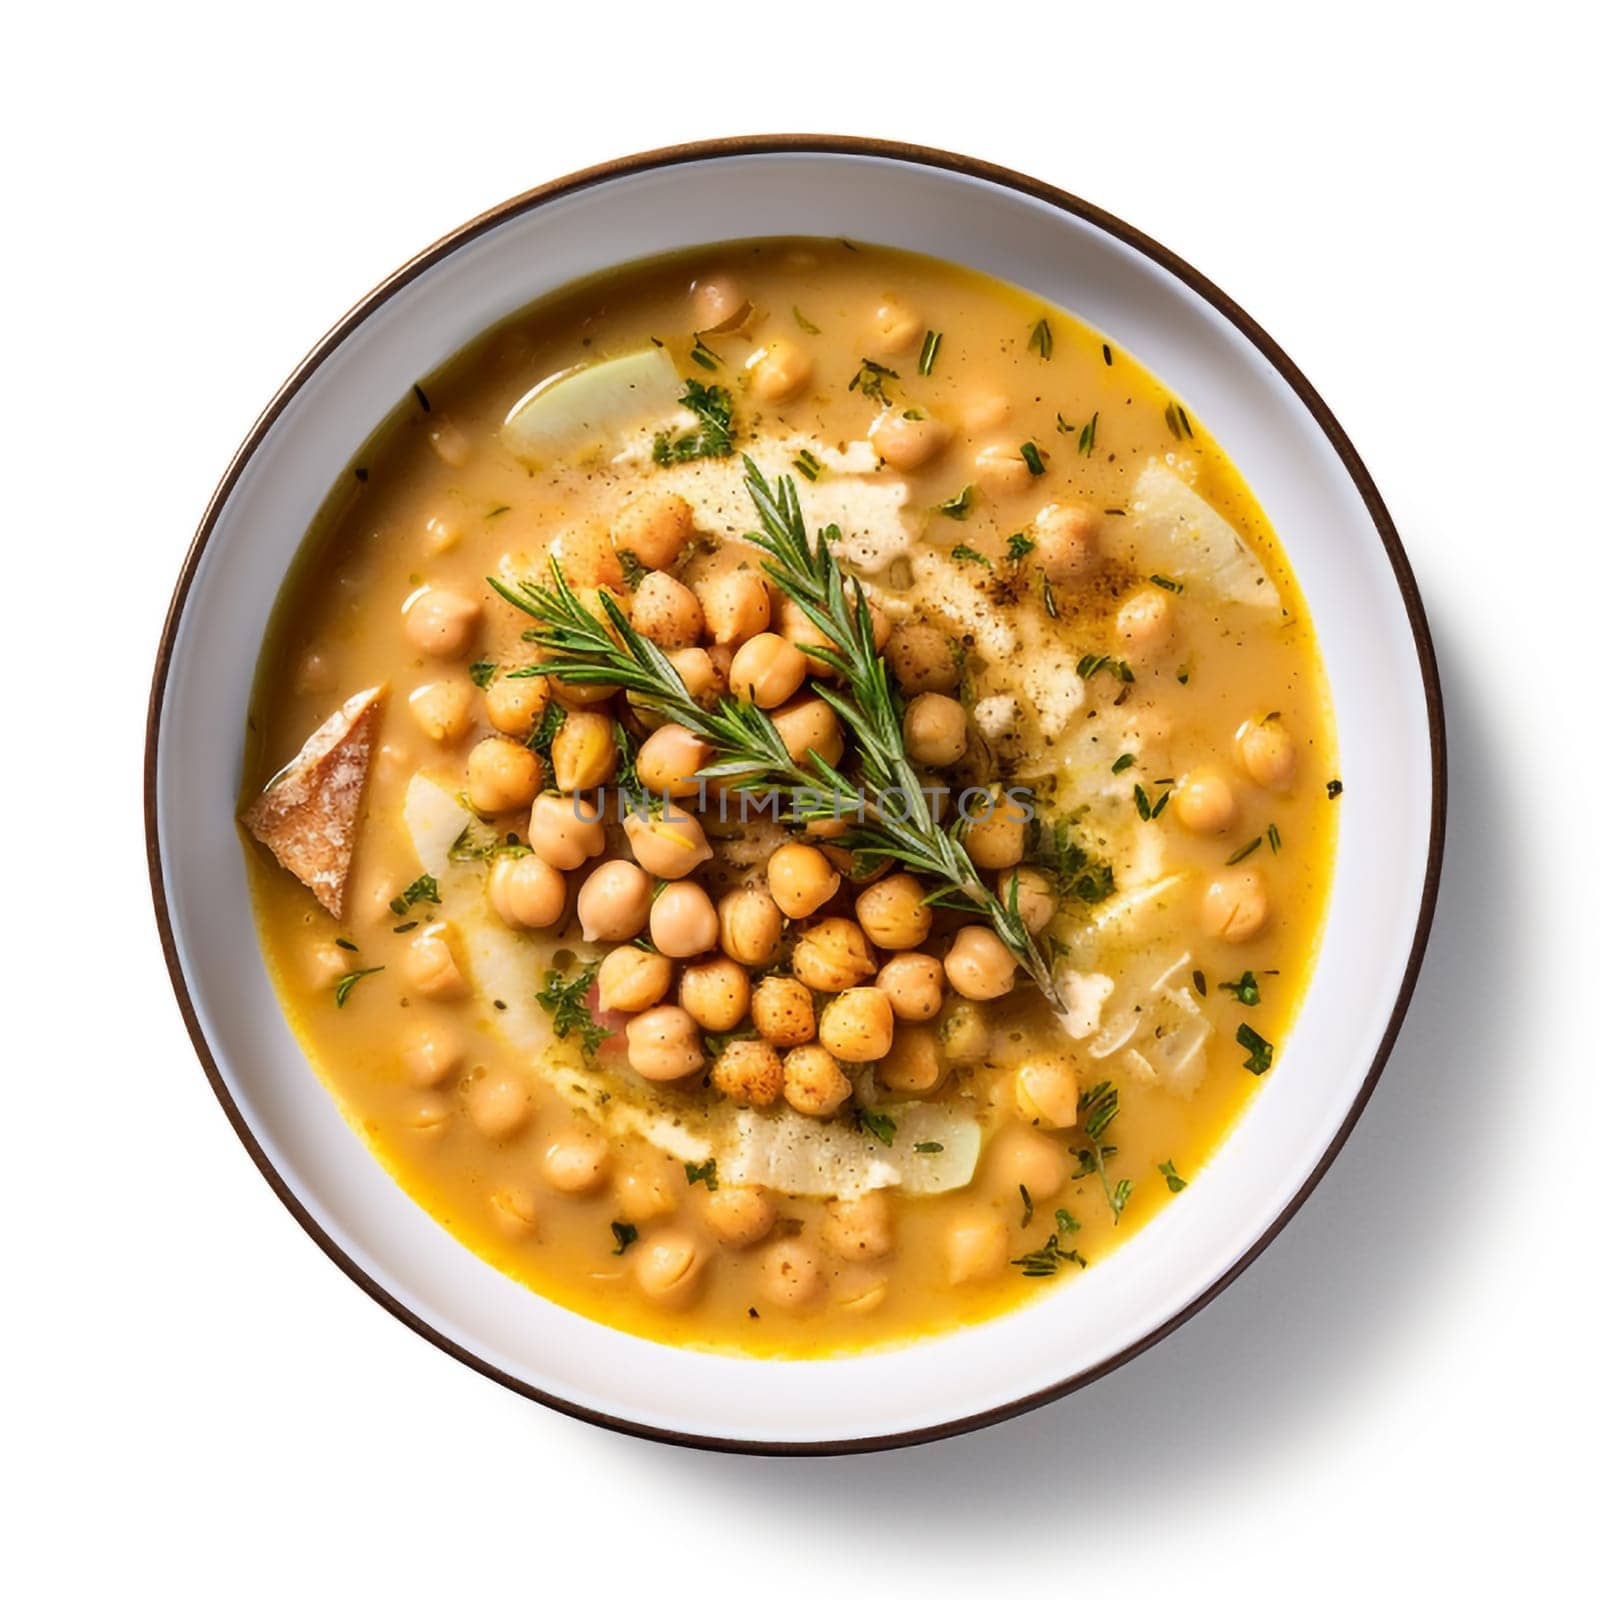 Chickpea Soup a classic of Umbrian cuisine and the epitome of Italian comfort food by Ciorba